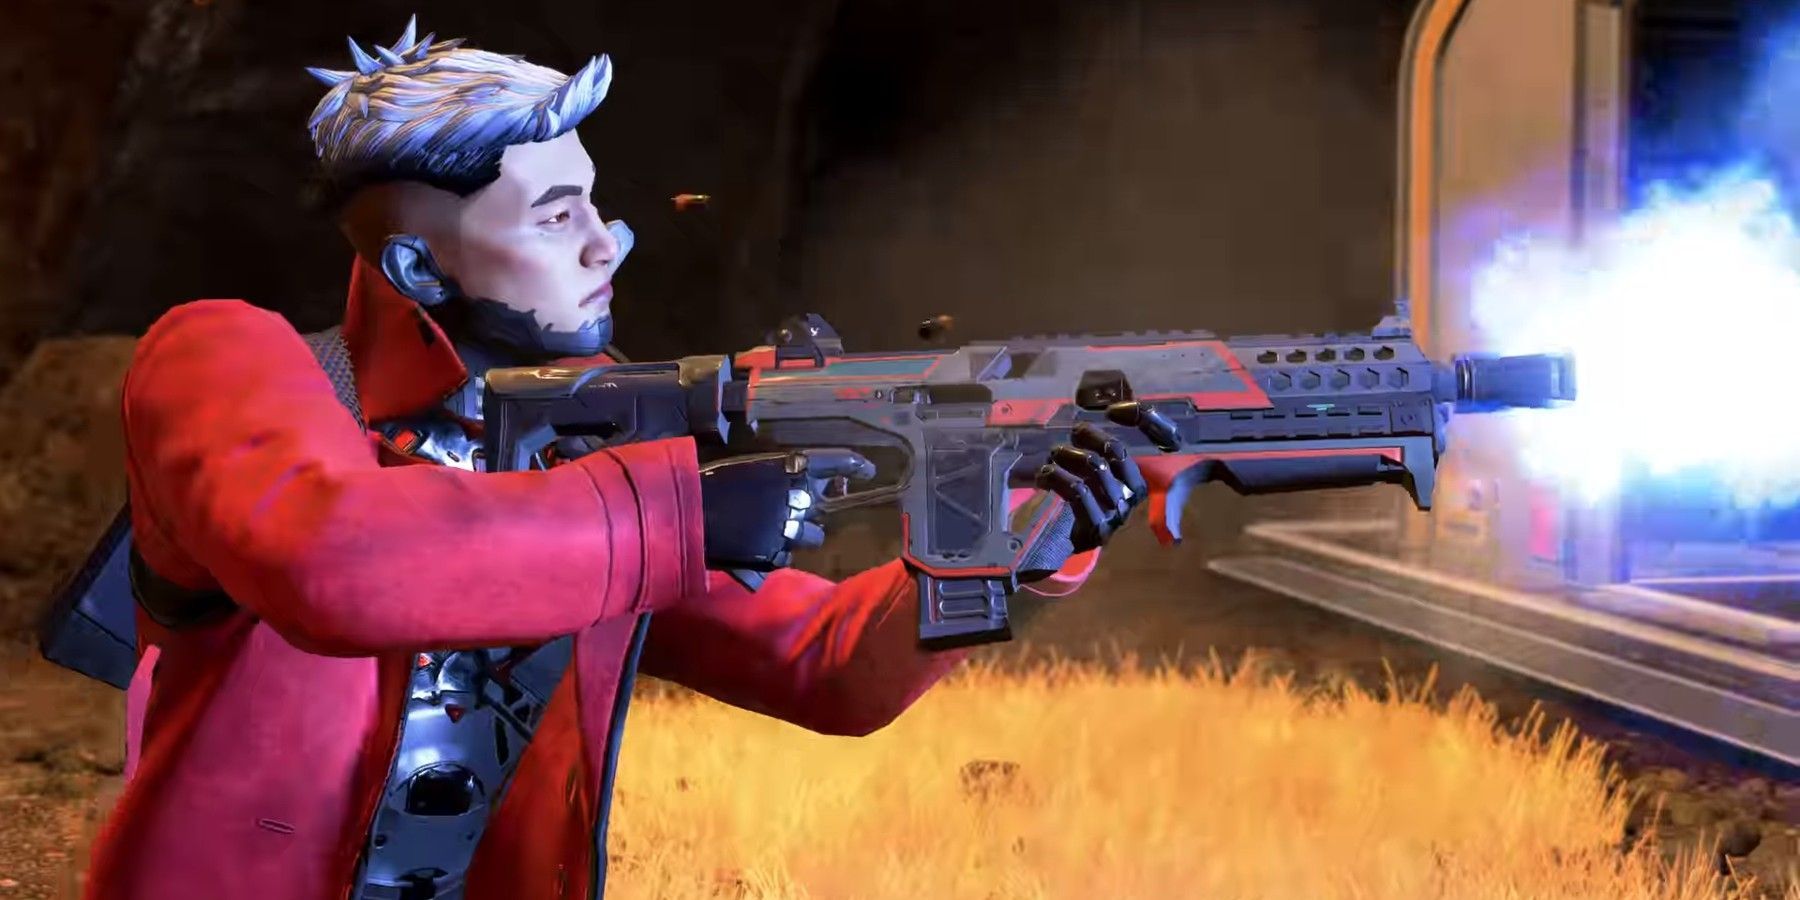 Crypto shooting the Volt SMG in Apex Legends